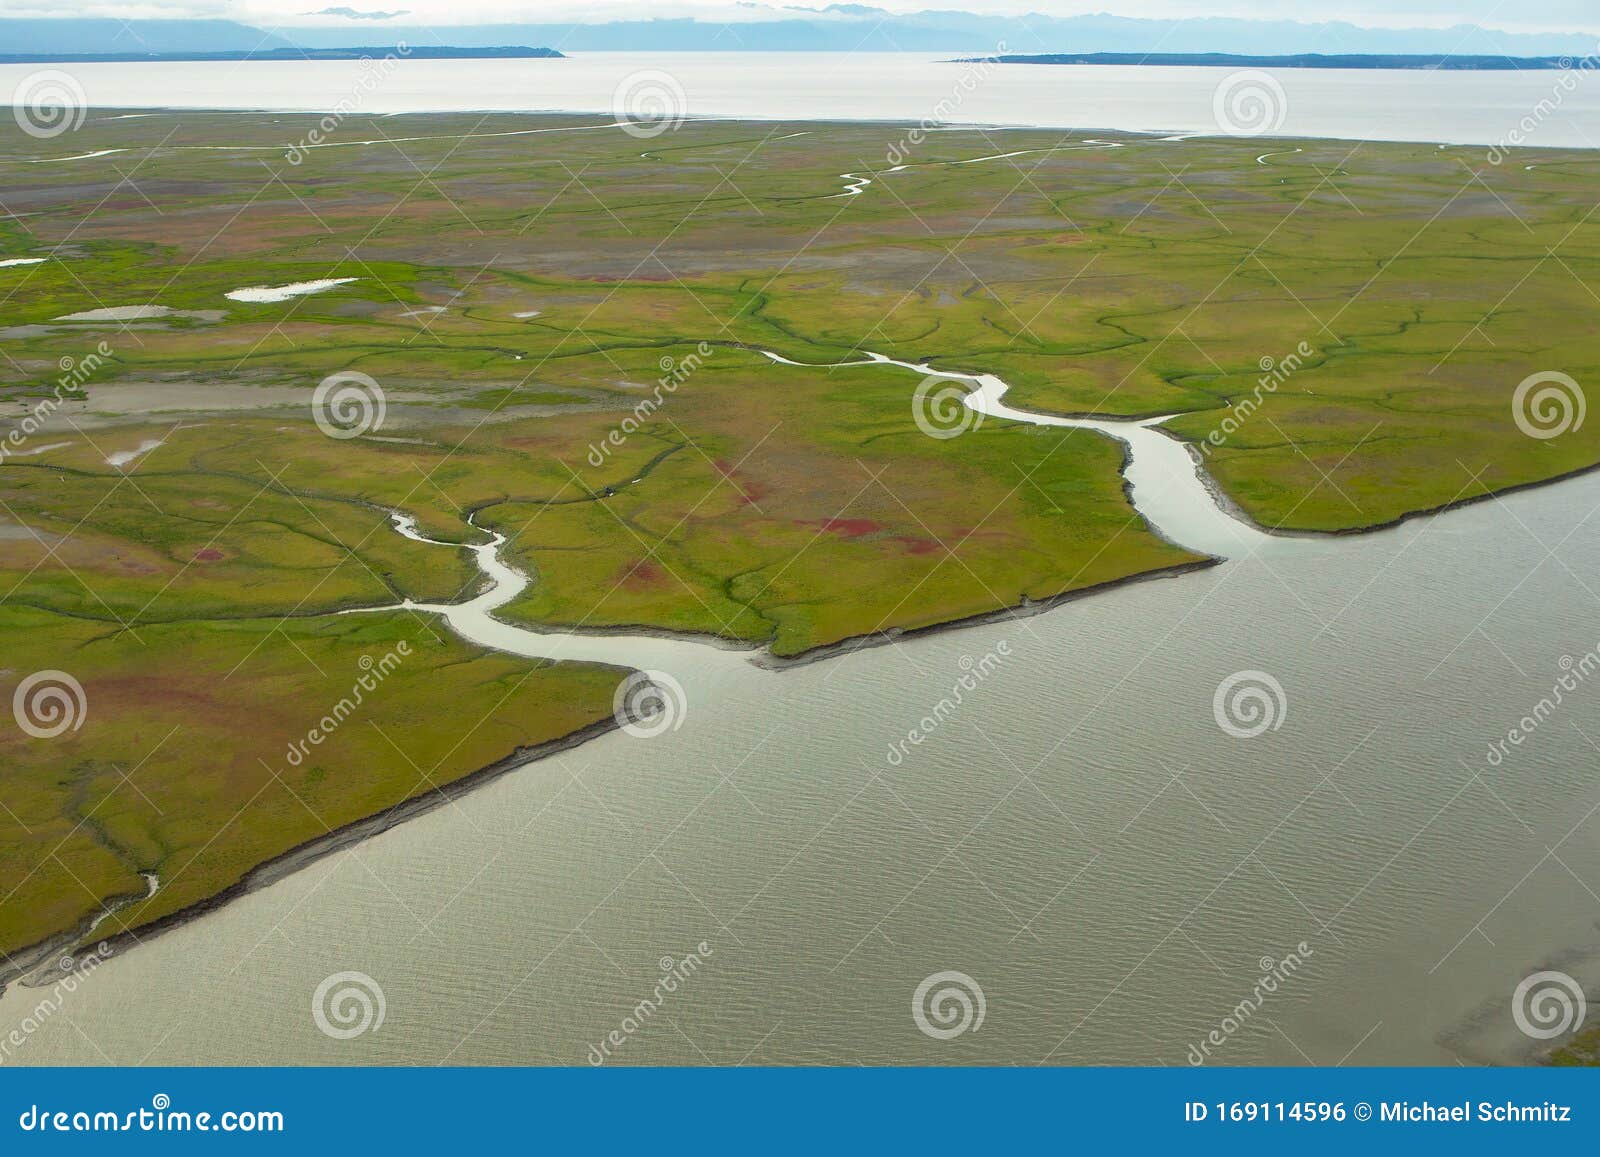 rivers and inlets cut through the green and red tundra as they flow to the ocean in alaska.